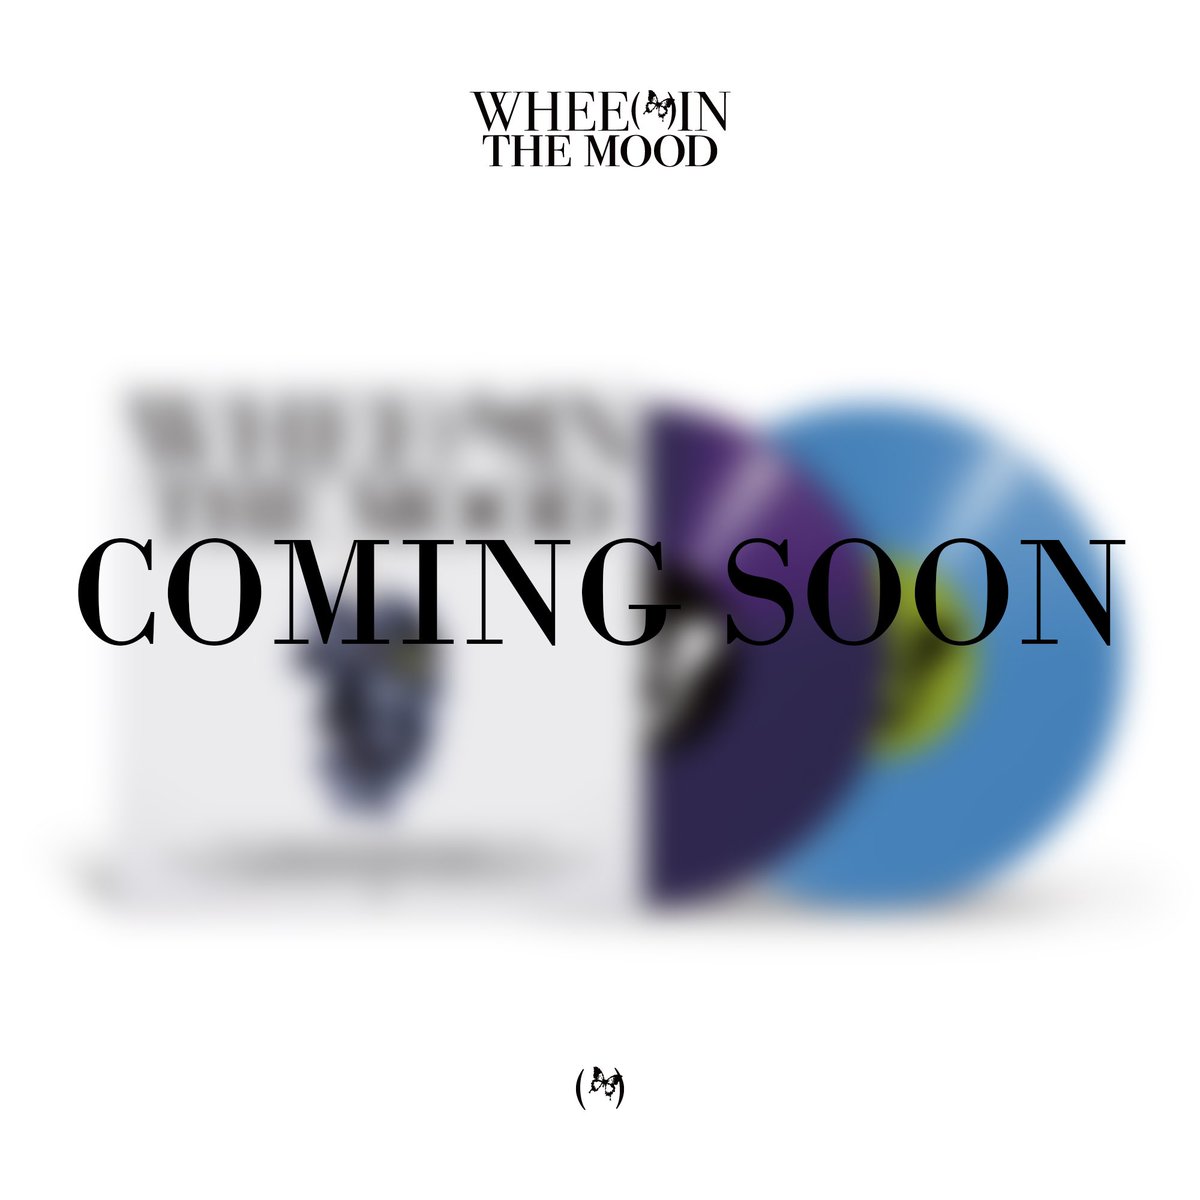 [#WheeIn] WHEE IN the mood [2LP] COMING SOON 🦋🍇 #휘인 #WHEEIN_the_mood 2024.04.17.5PM #COMINGSOON